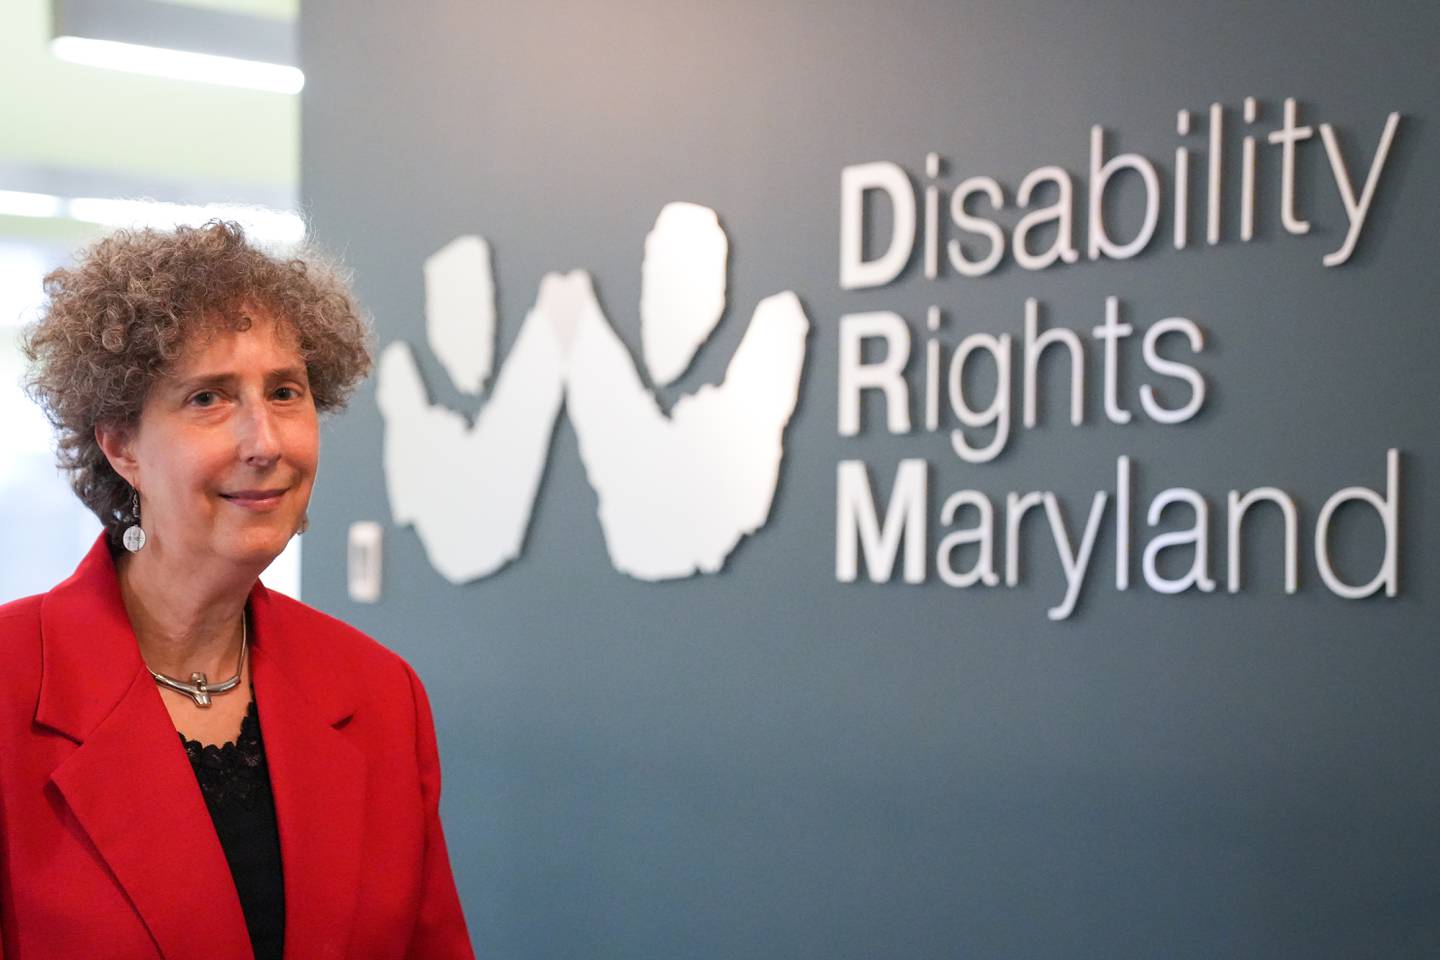 Leslie Margolis, a lawyer for the Disabilities Rights Maryland, sits for a portrait at her office on 8/10/22. Margolis is handling cases of Baltimore County special education students who did not receive the services they need due to staffing shortages.